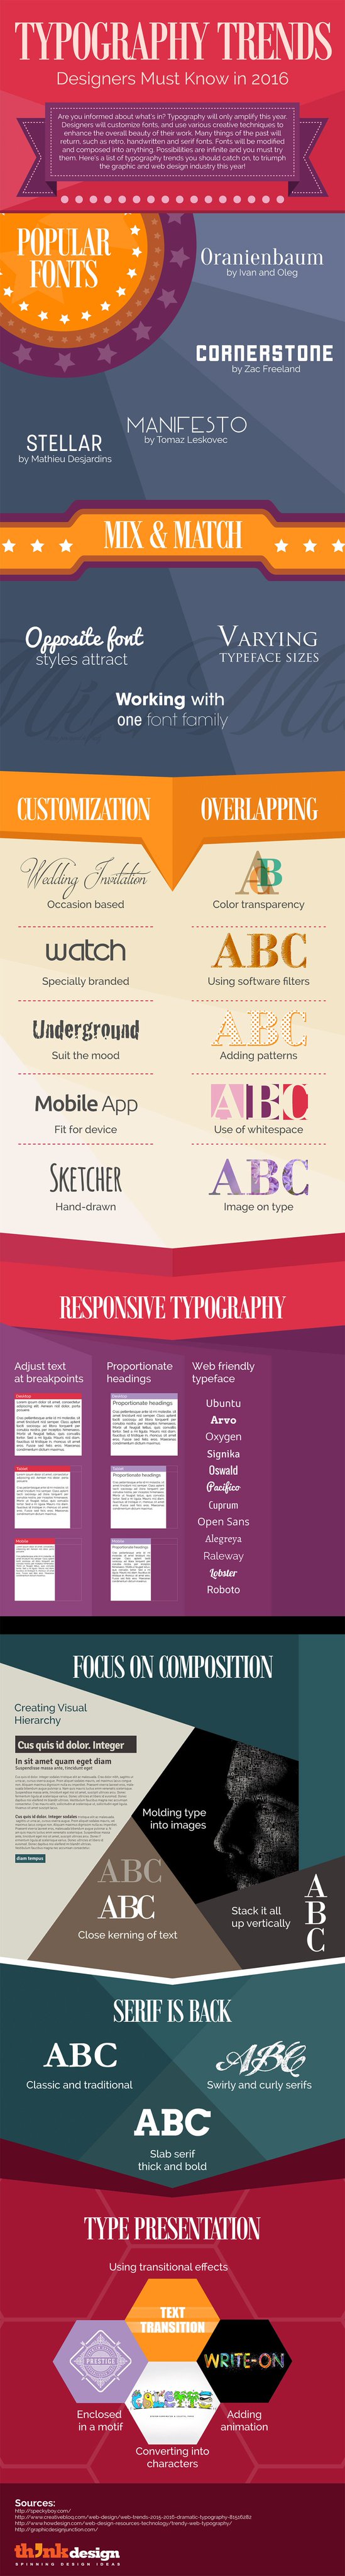 How to Choose the Perfect Fonts for Every Project: A Detailed